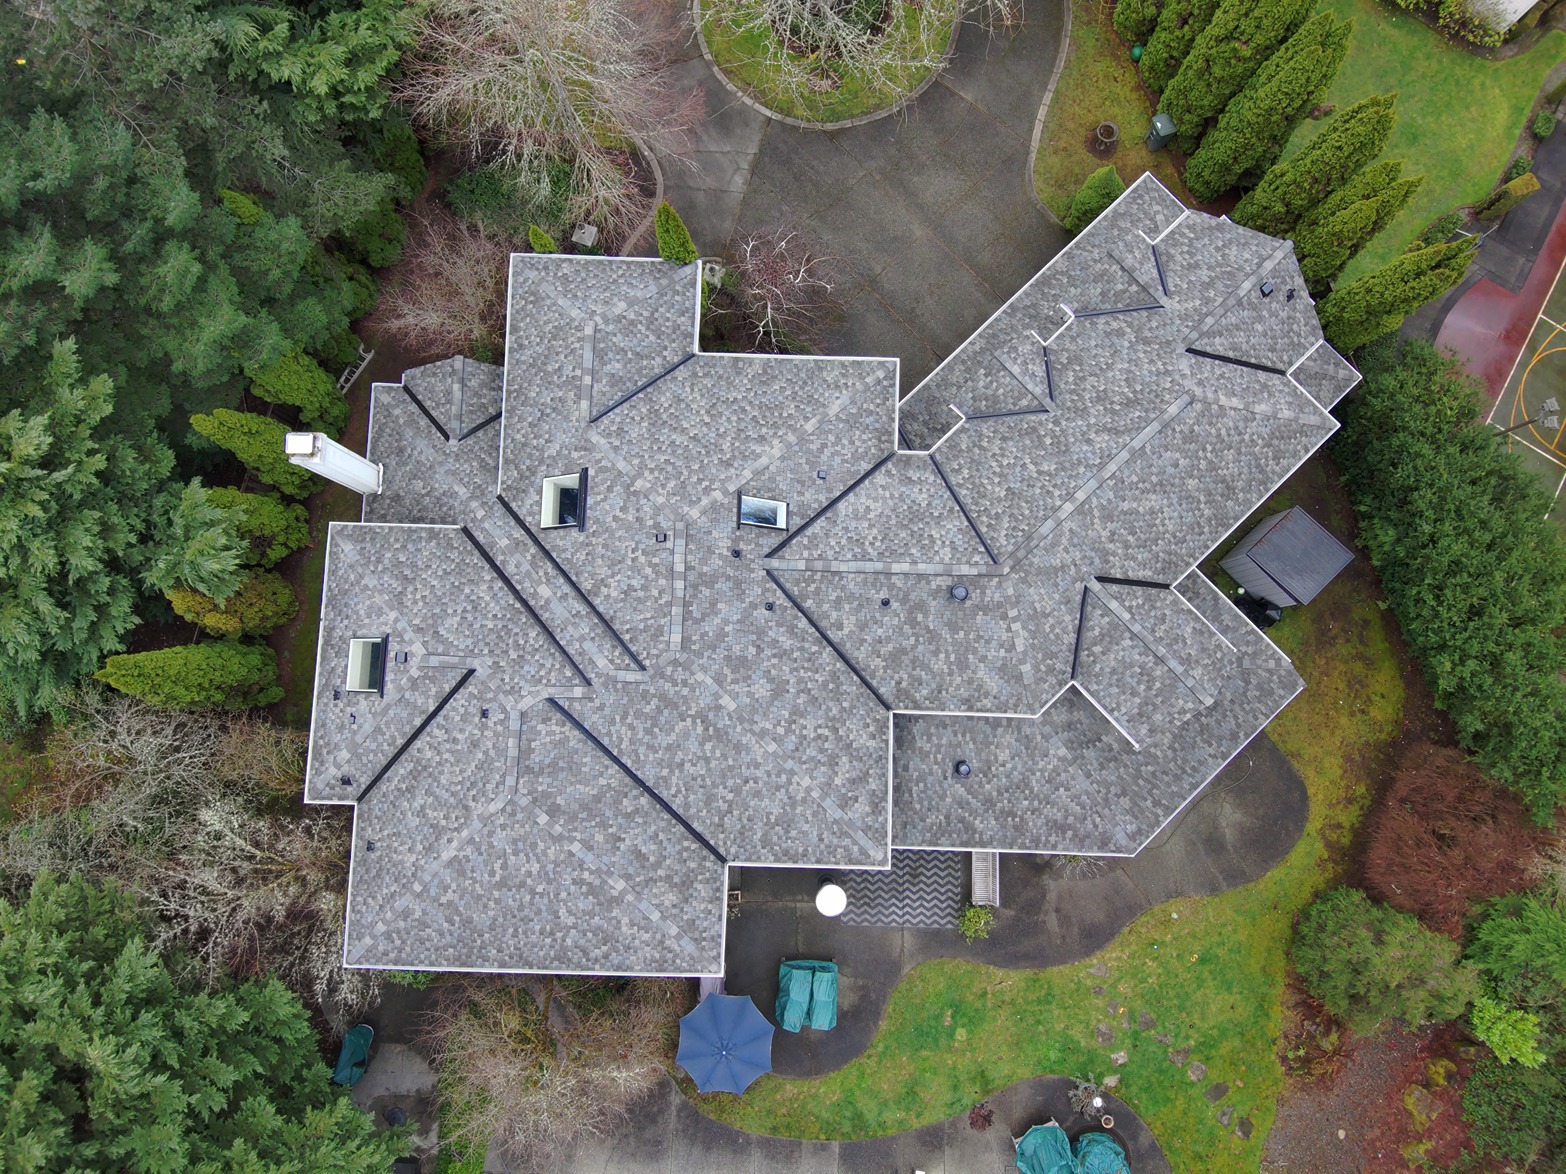 Orca Roofing - Photo Gallery